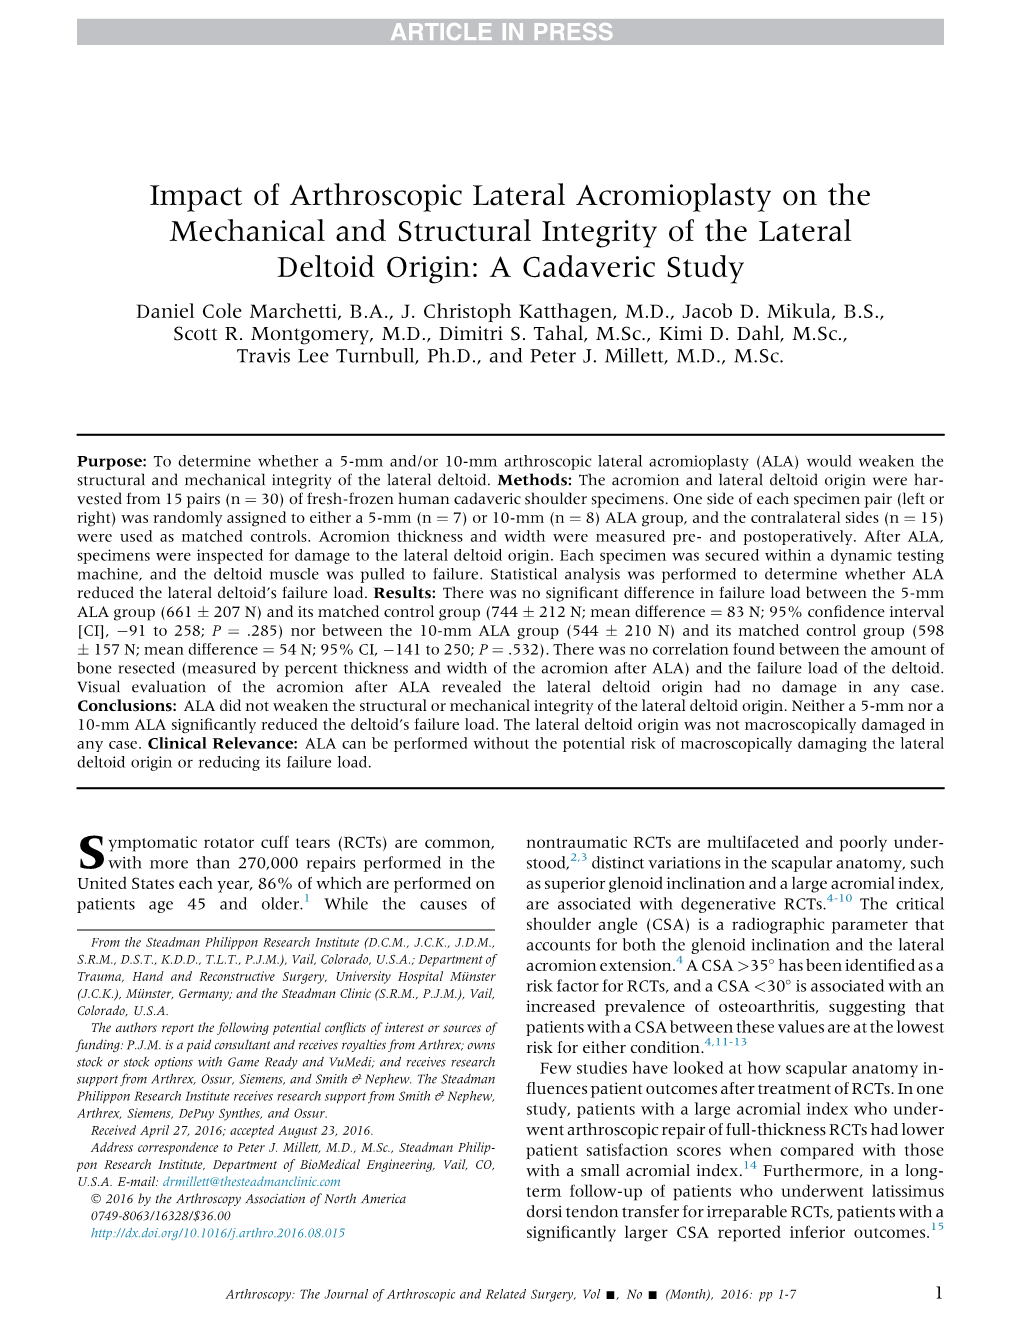 Impact of Arthroscopic Lateral Acromioplasty on the Mechanical and Structural Integrity of the Lateral Deltoid Origin